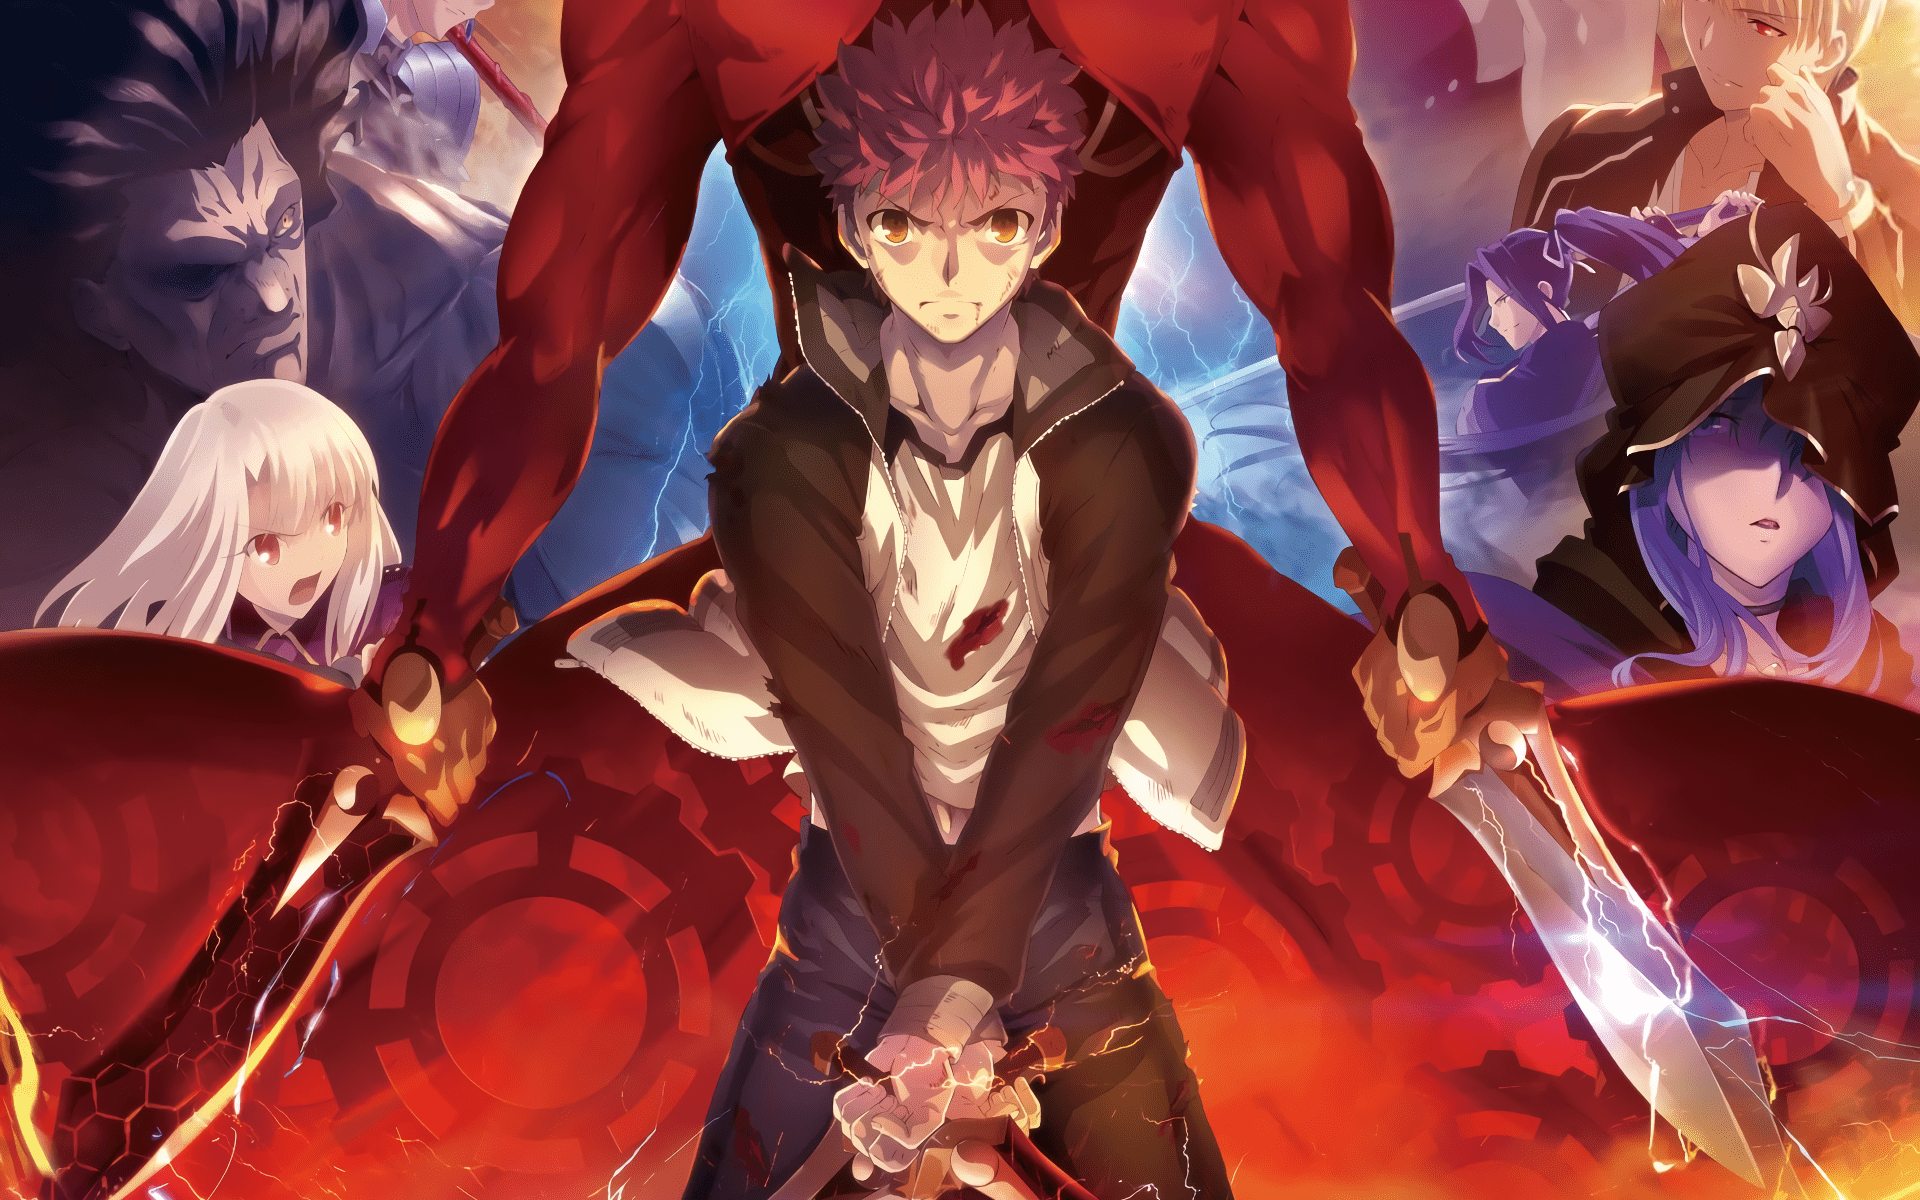 Fate Stay Night Anime Wallpapers Top Free Fate Stay Night Anime Backgrounds Wallpaperaccess